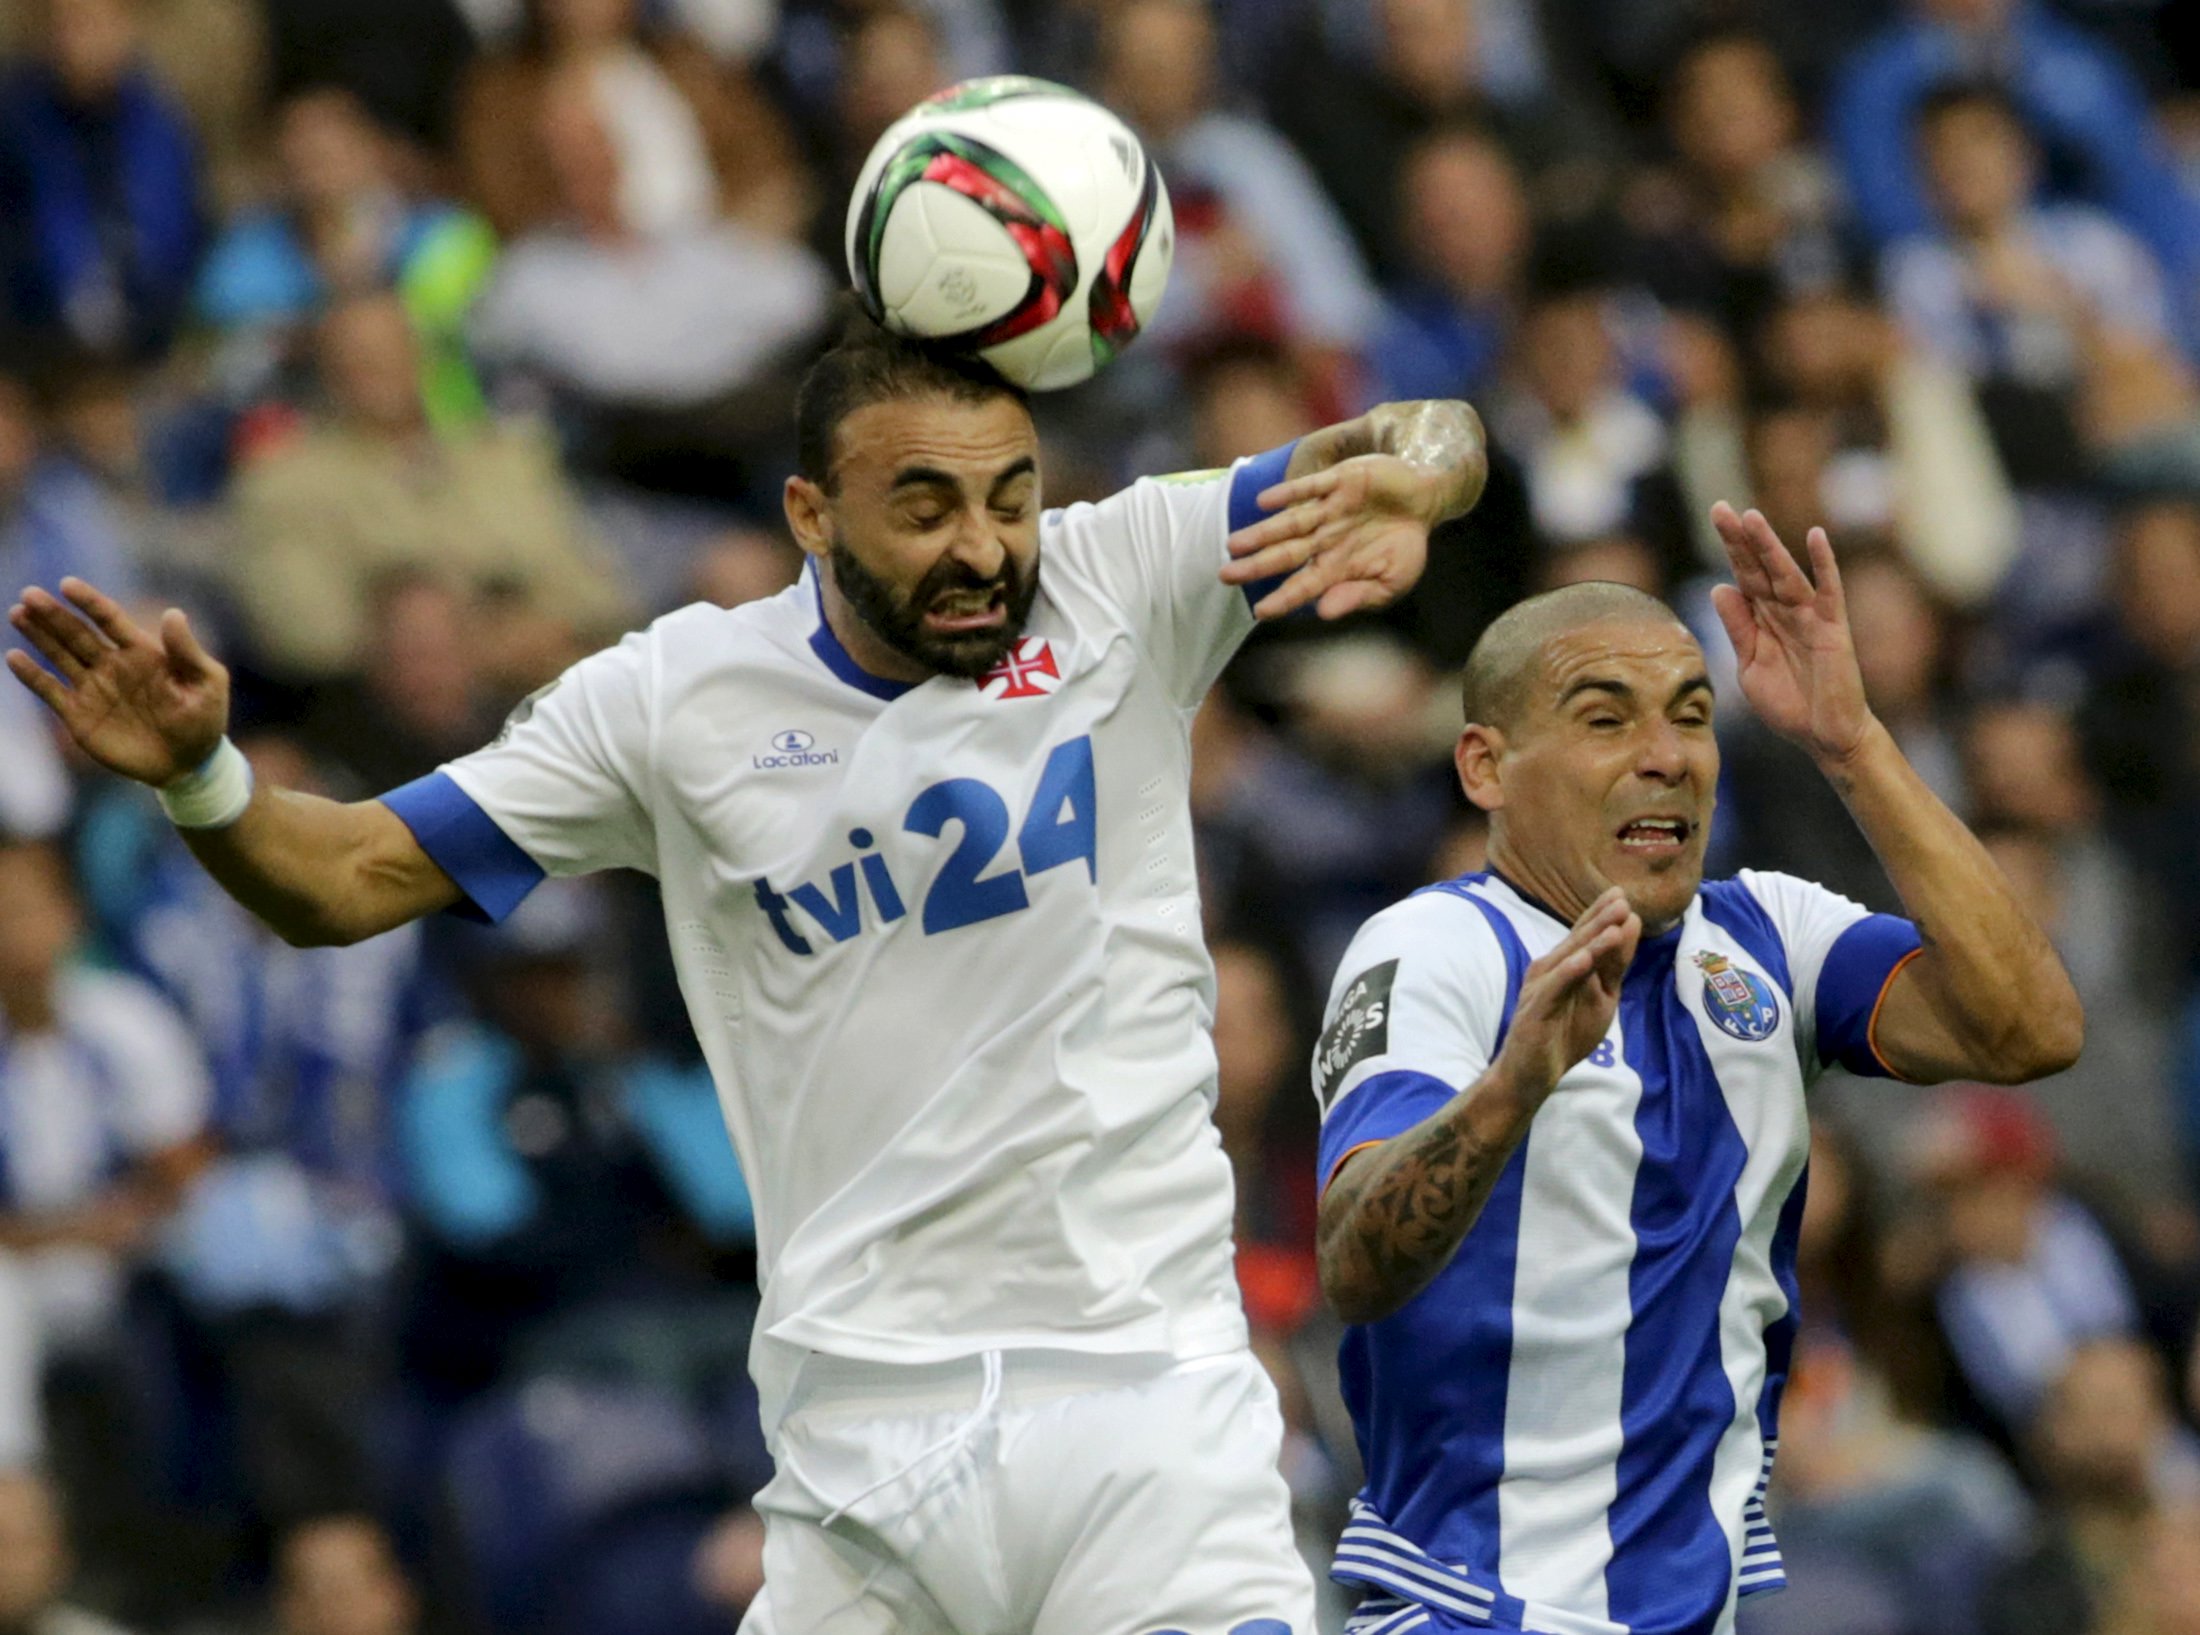 Porto's Maxi Pereira (R) jumps for the ball with Belenenses' Carlos Martins during their Portuguese Premier League soccer match at Dragao stadium in Porto, Portugal, October 4, 2015. REUTERS/Miguel Vidal